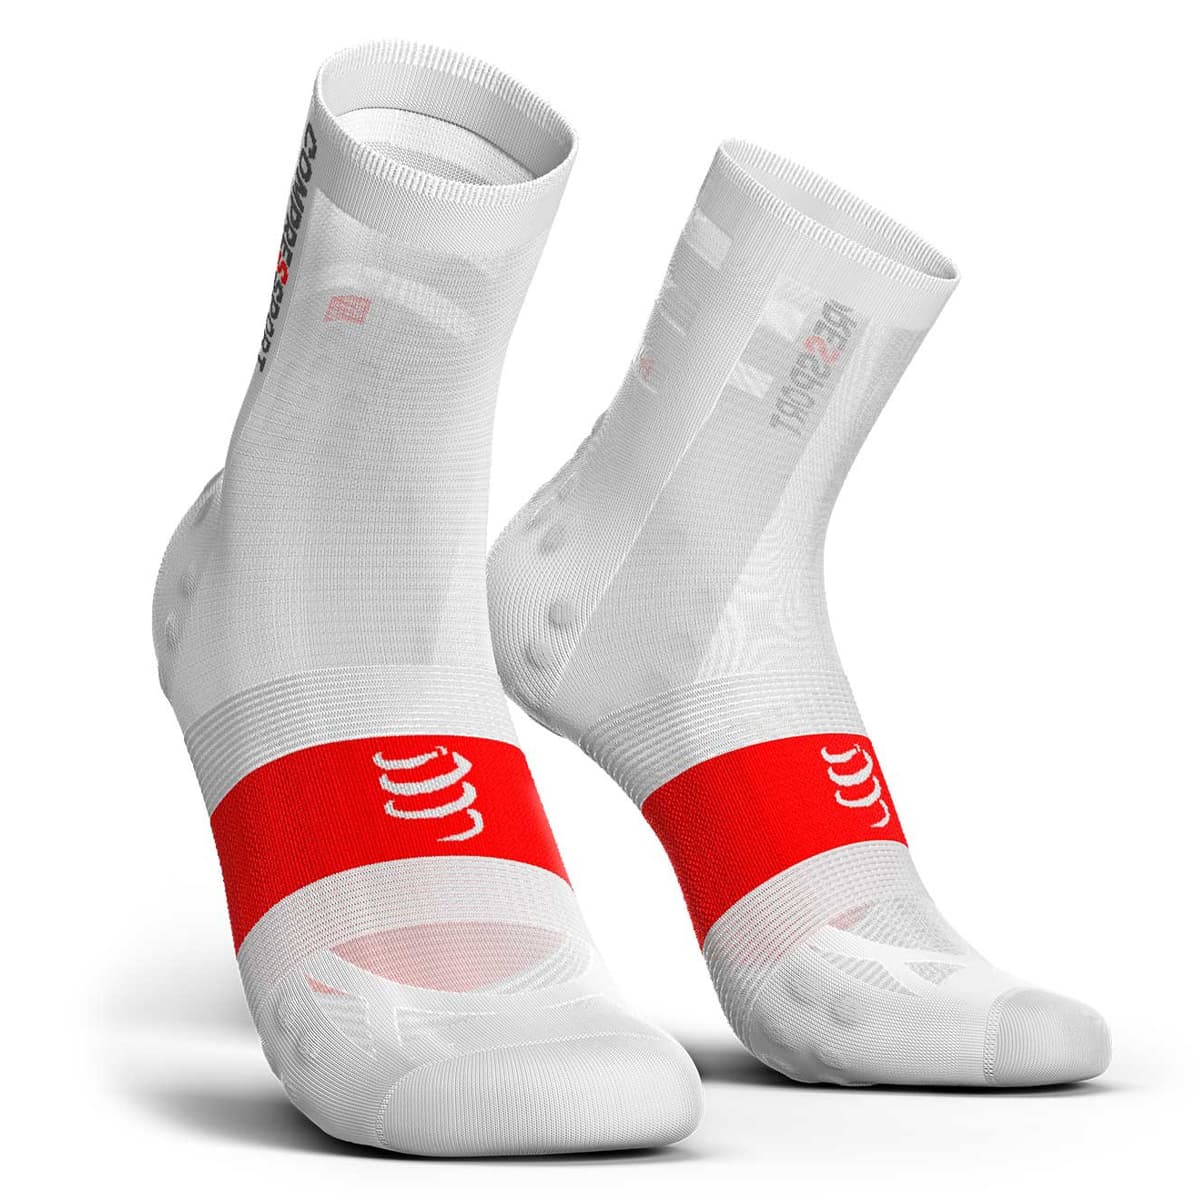 CHAUSSETTES COMPRESSPORT RACING V3 ULTRA LEGER VELO